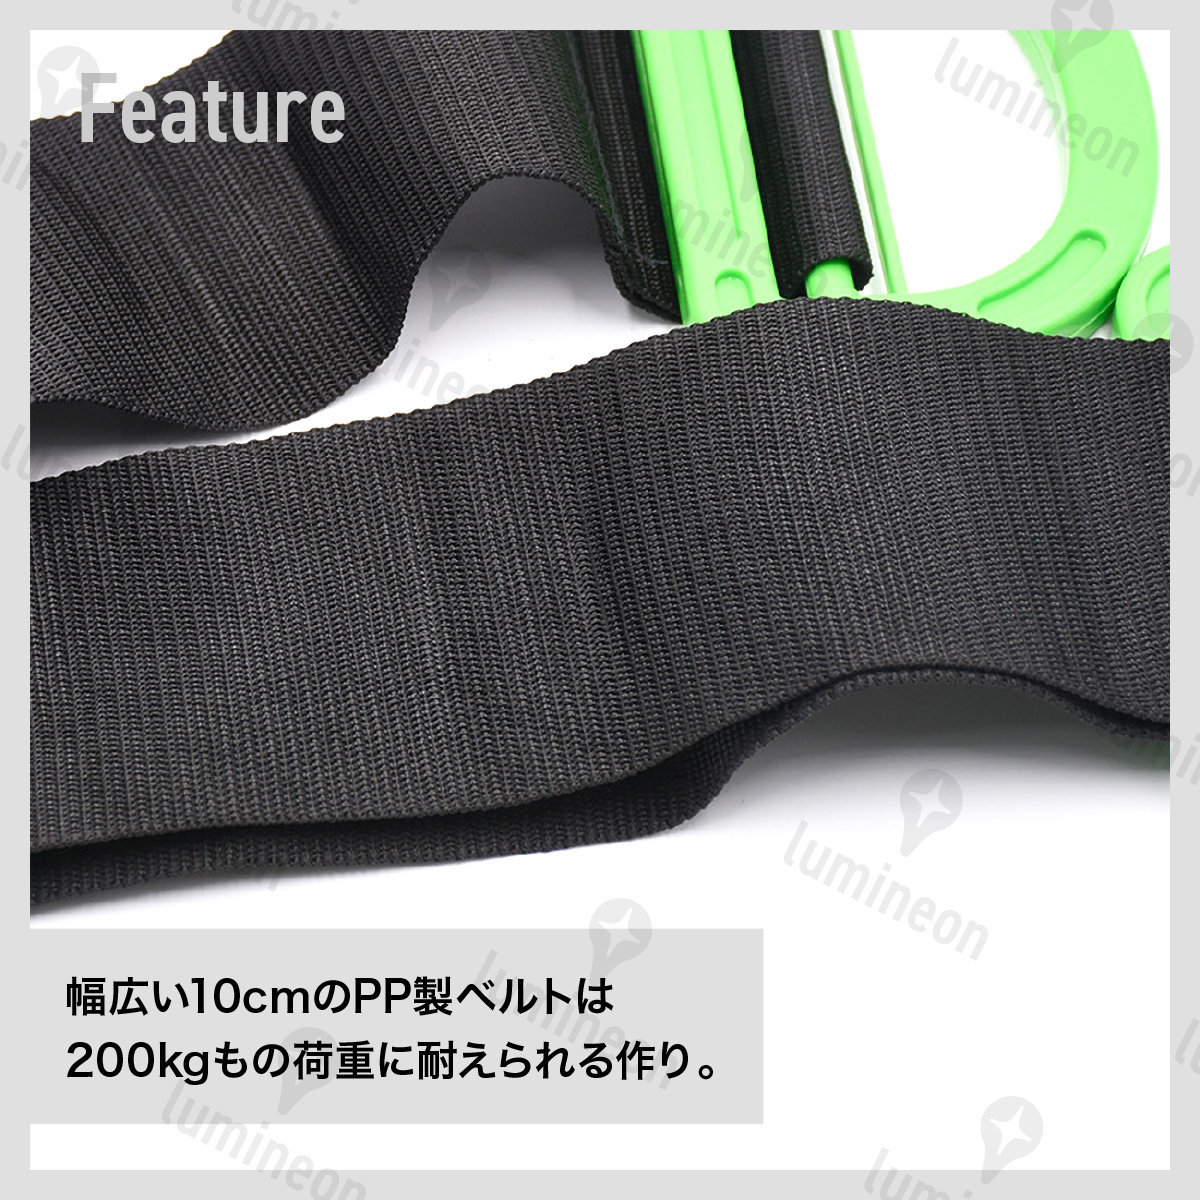  transportation belt Carry moving moving cardboard rust furniture movement convenience goods furniture heavy luggage . to carry tool tool DIY red g259b 3